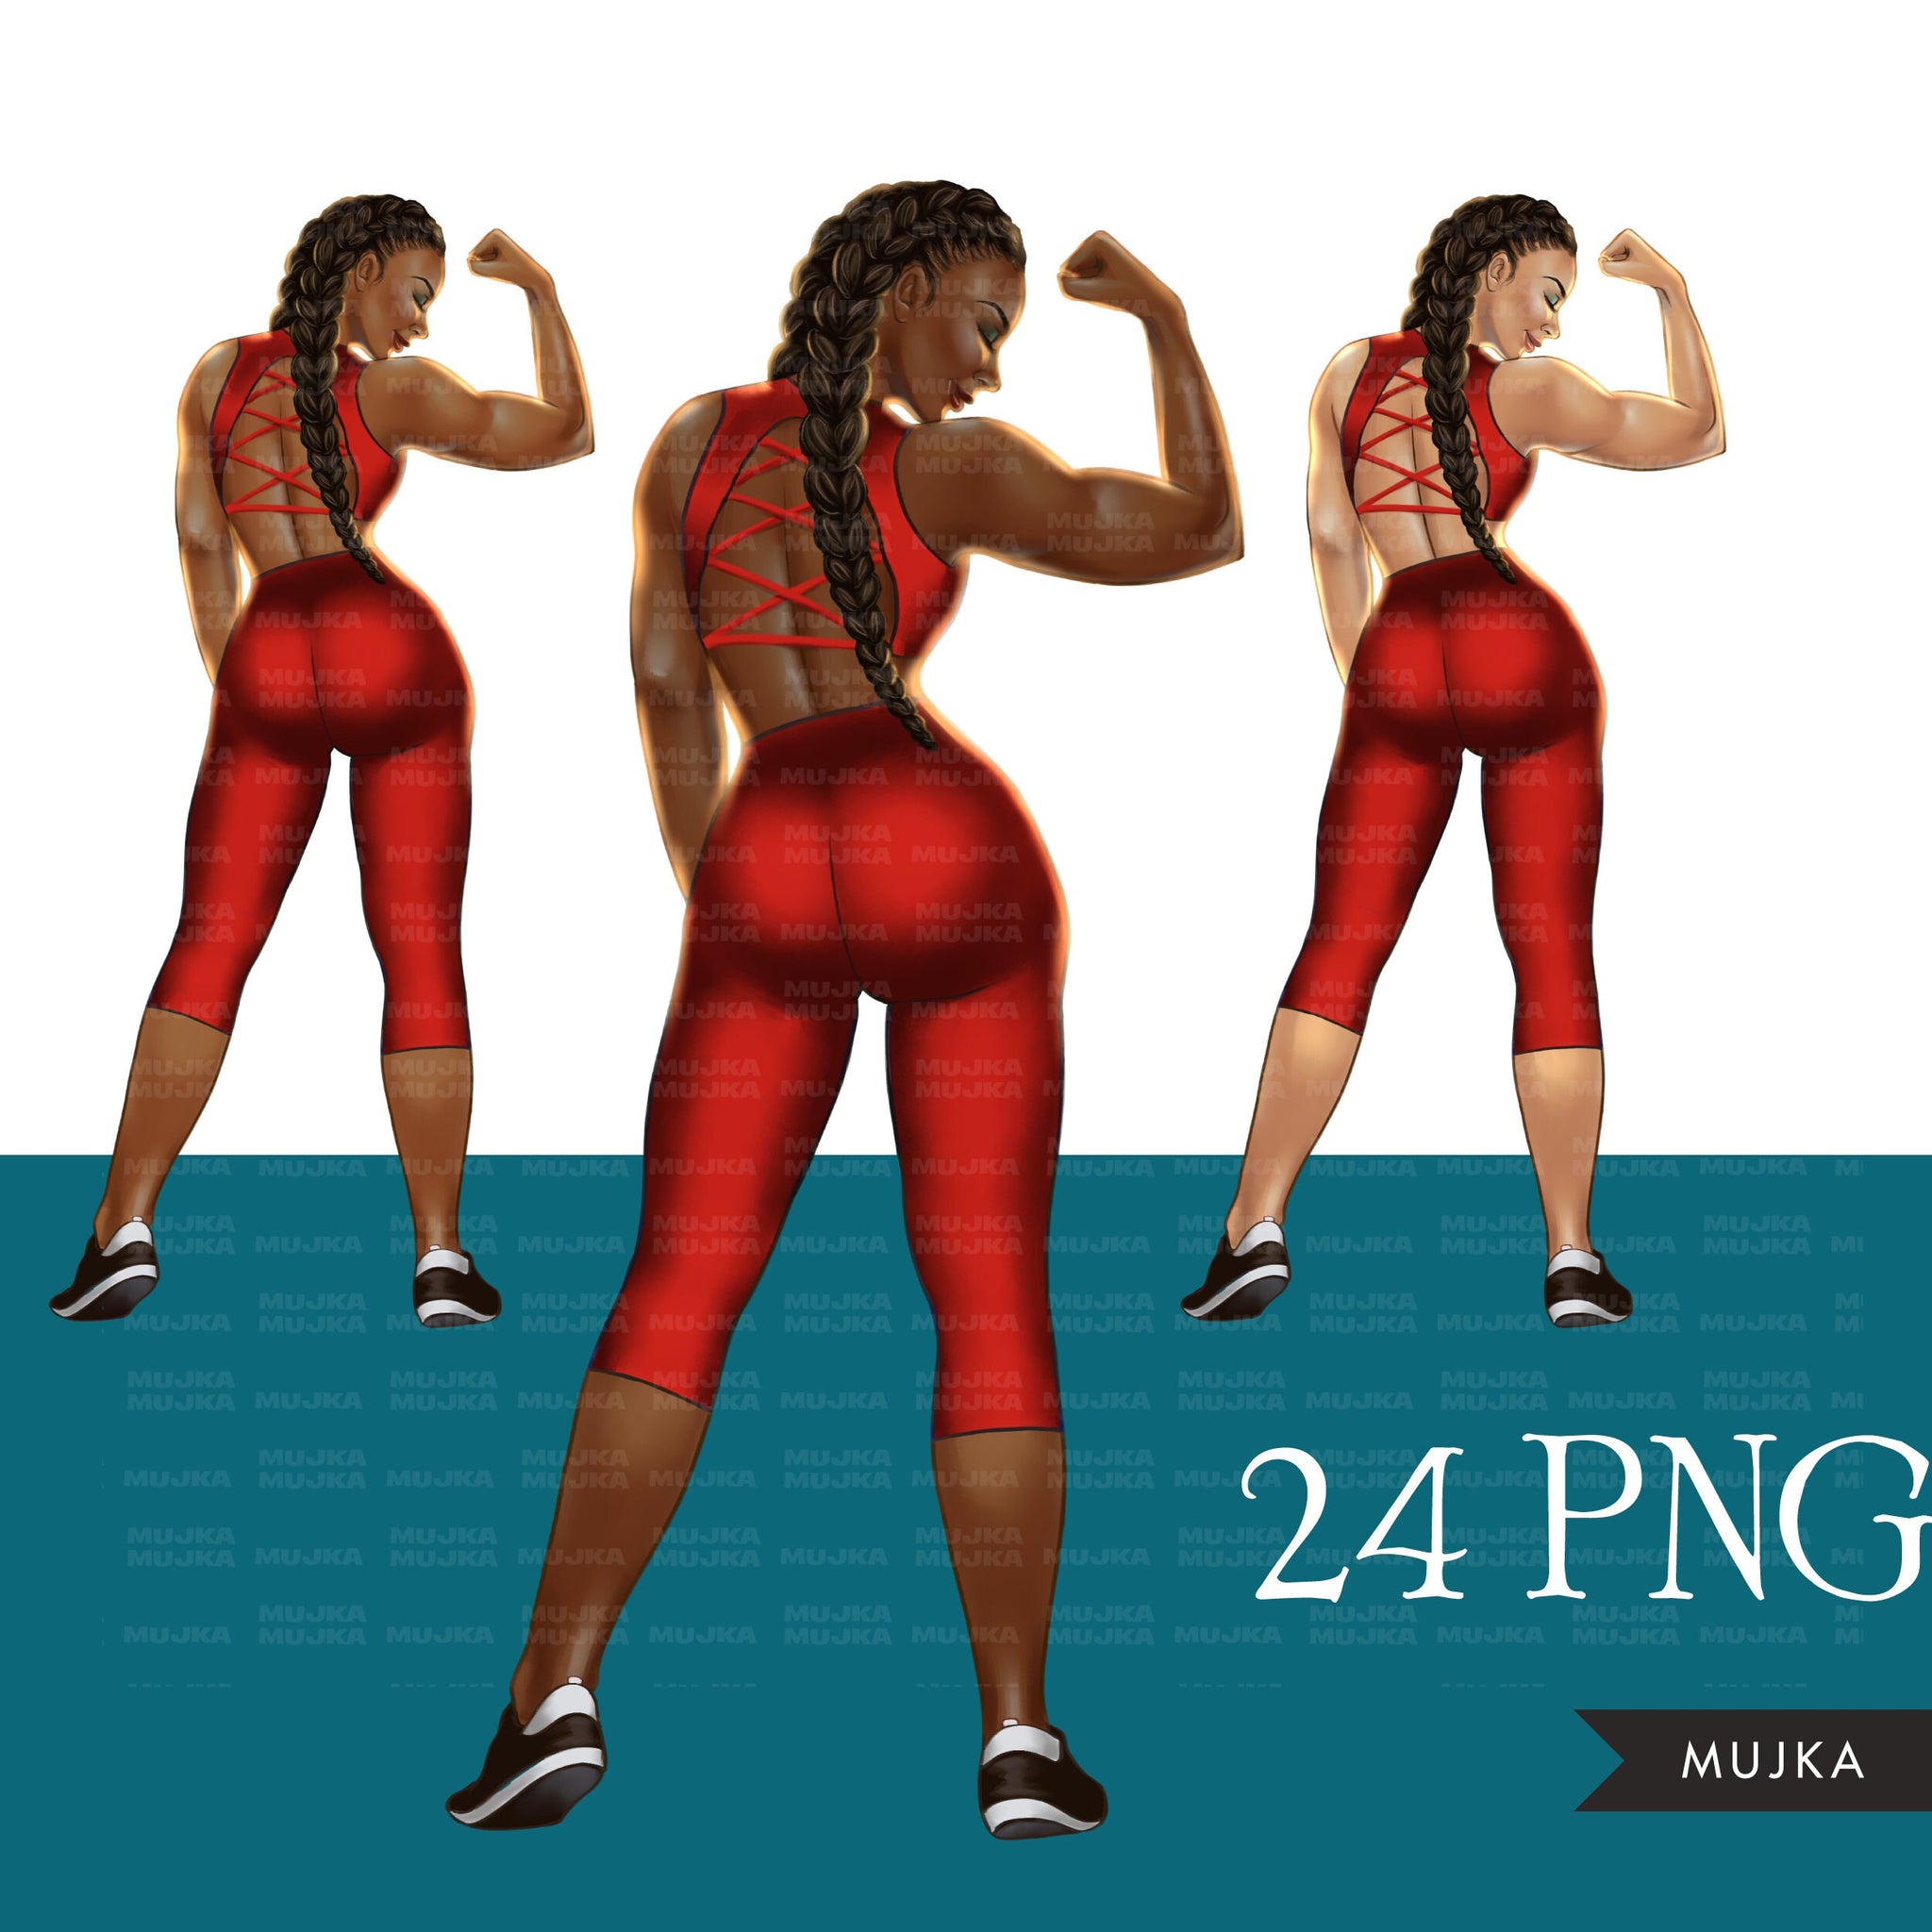 Planner girl png, Athletic woman png, personal trainer clipart, Black Girl Planner Stickers, Black Women, latino woman clipart, digital doll